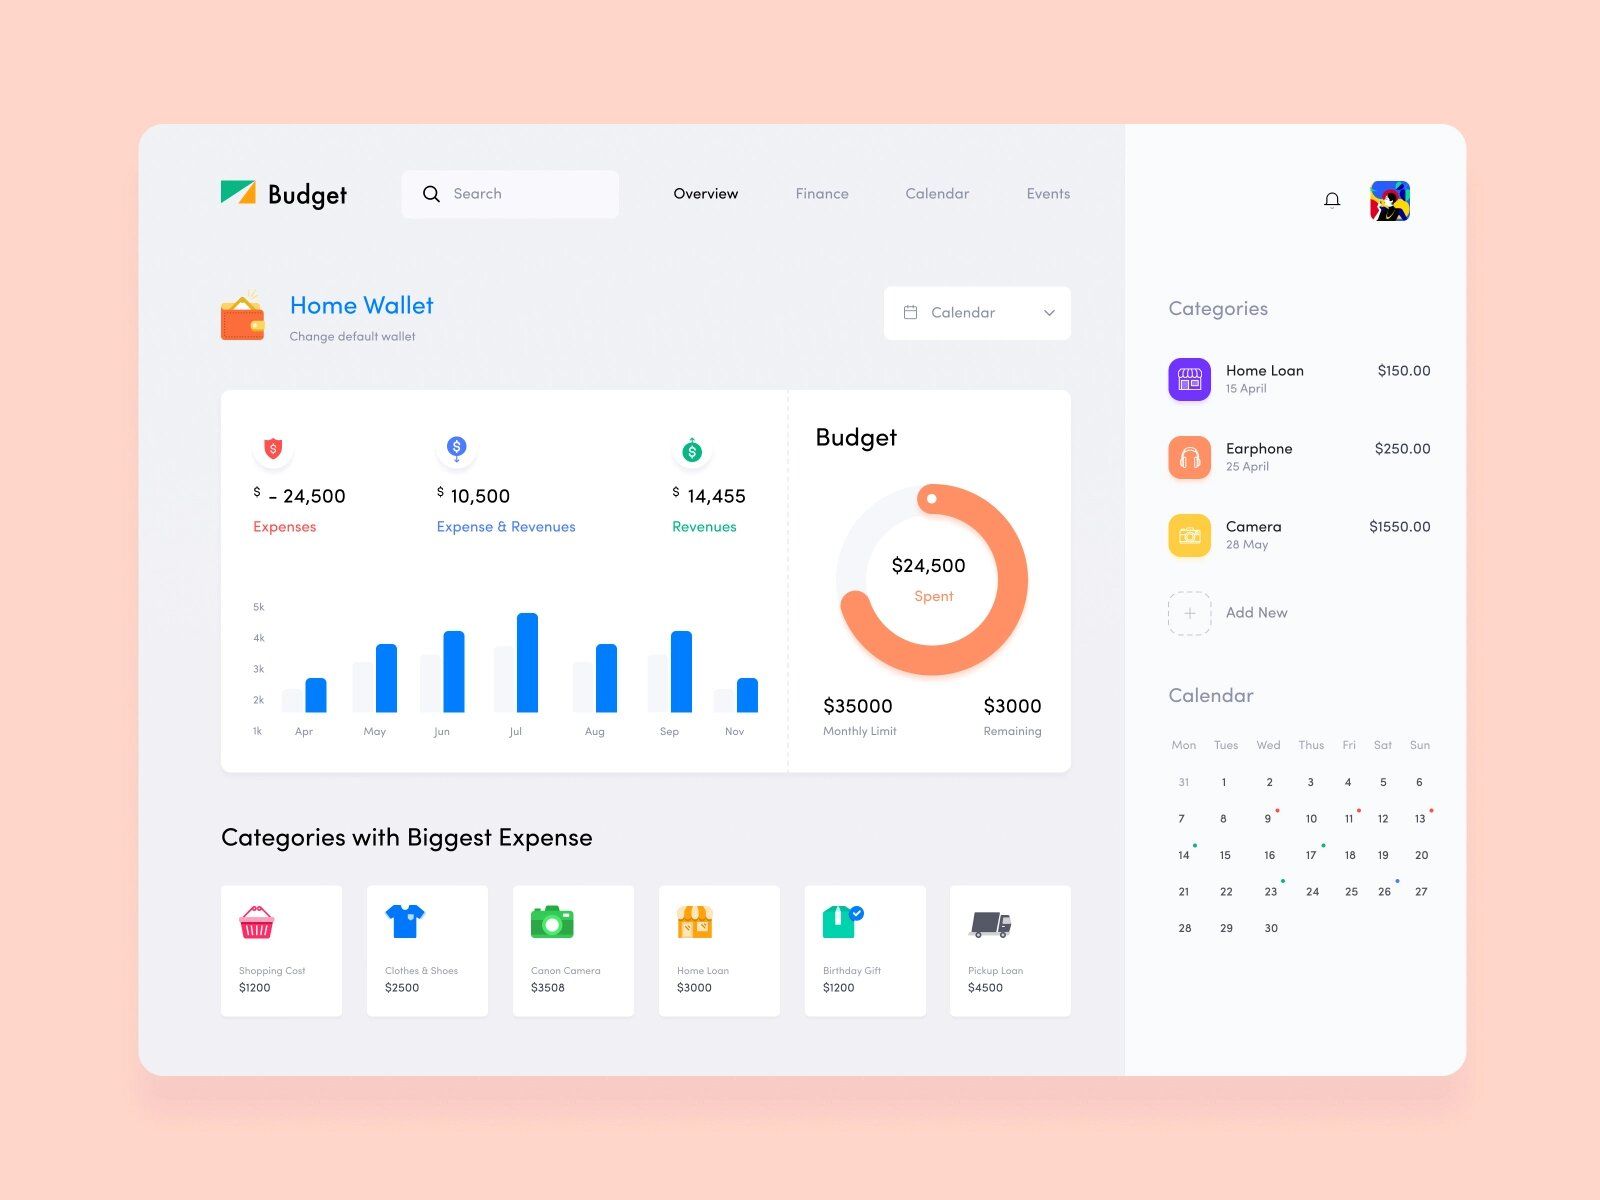 A custom software has a lot of options to enable money turnover tracking since accounting software need this feature for tax management (*image by [Masudur Rahman 🇧🇩](https://dribbble.com/uigeek){ rel="nofollow" target="_blank" .default-md}*)